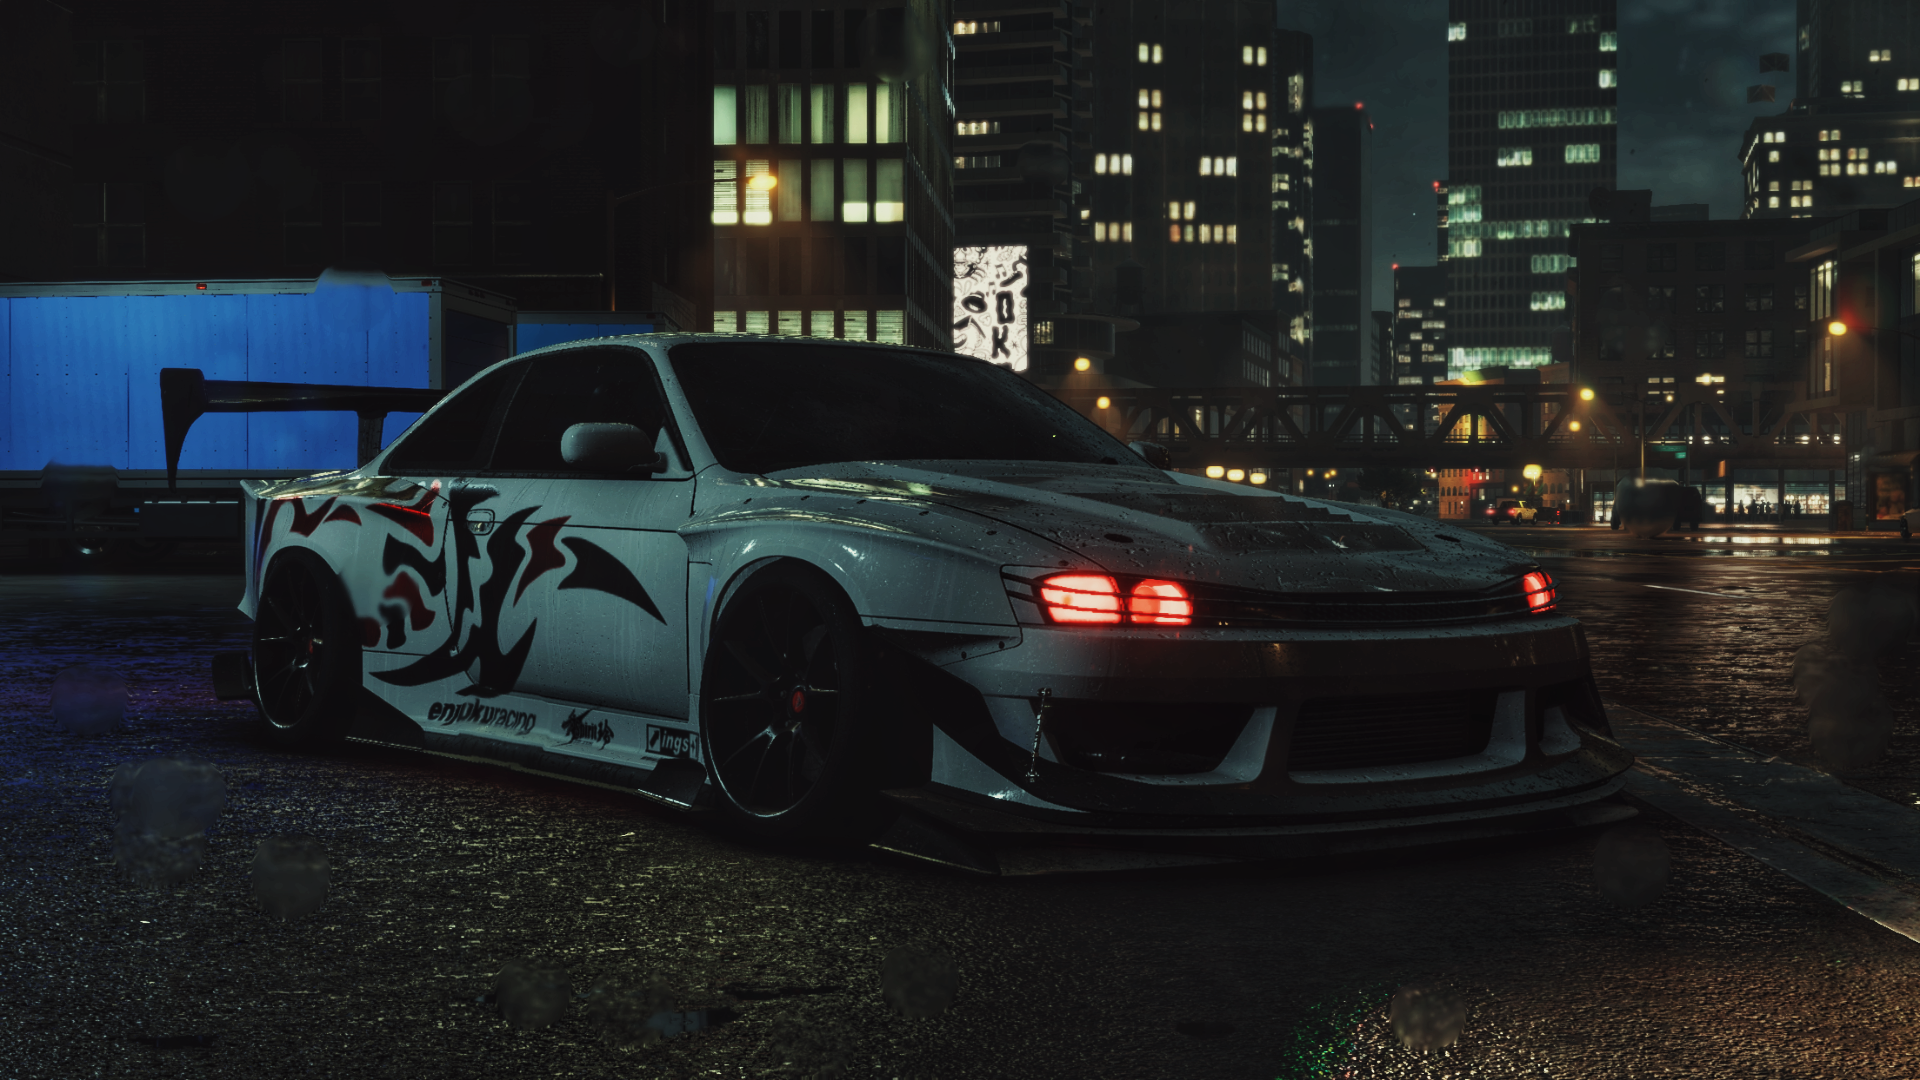 General 1920x1080 Need for speed Unbound Need for Speed edit CGI race cars car park car 4K gaming video game characters effects video games EA Games Criterion Games night headlights city city lights